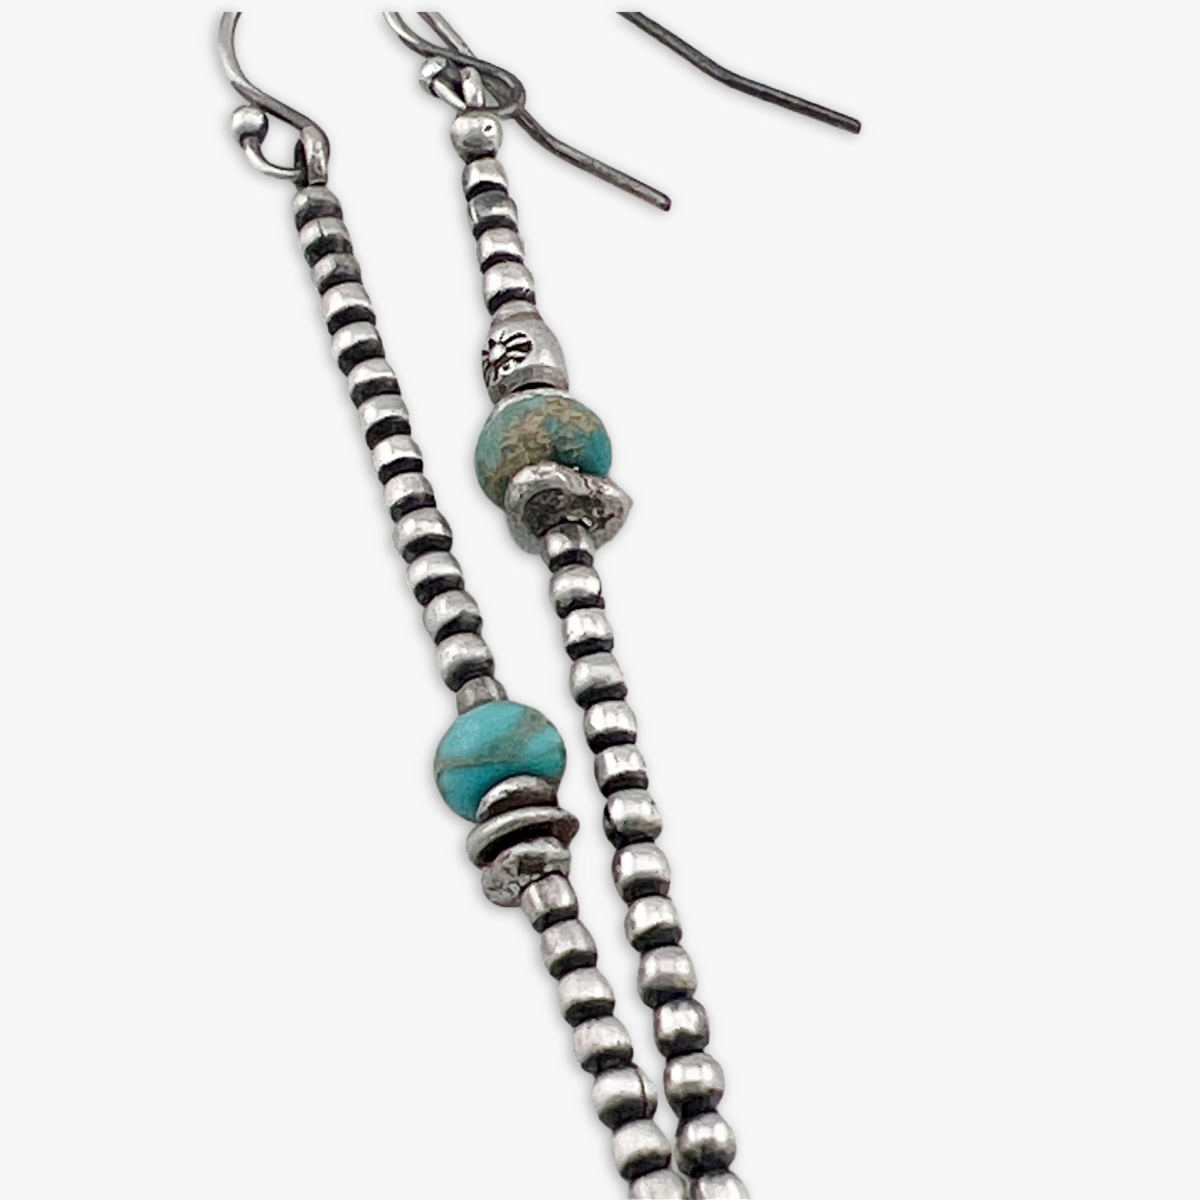 Beaded Stick with Turquoise